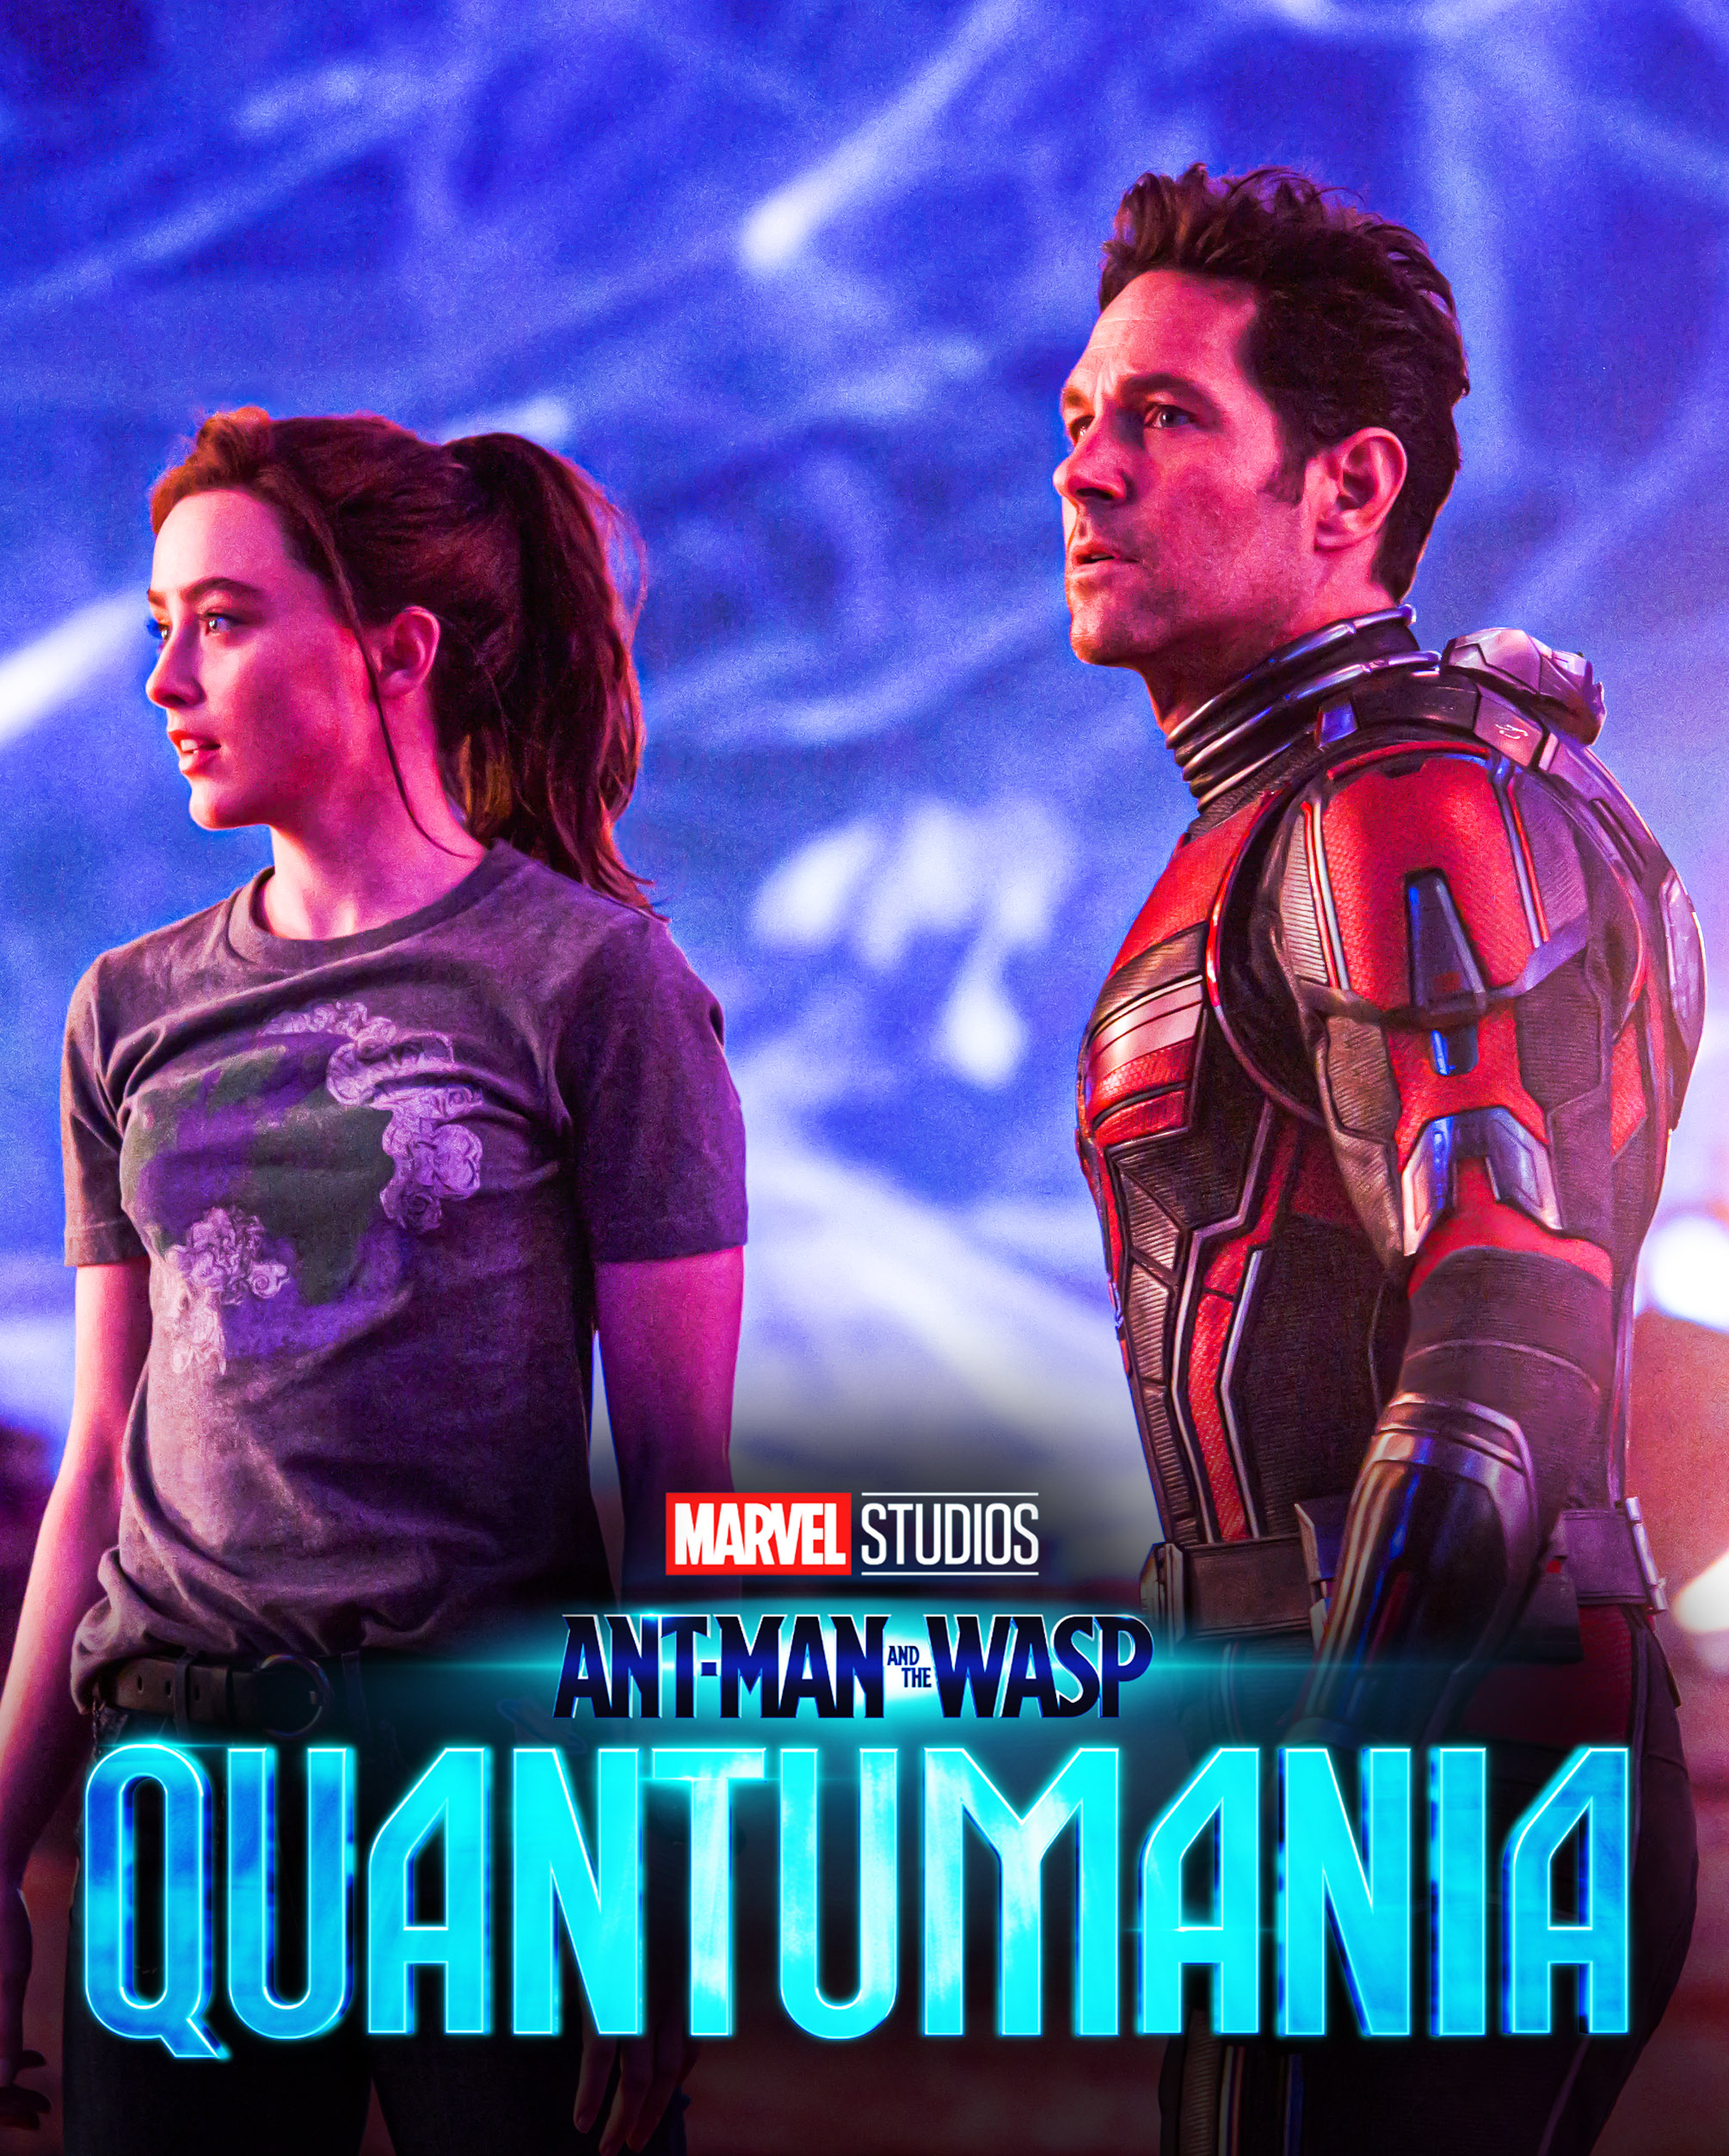 Ant-Man 3 release date, trailer and more about Quantumania